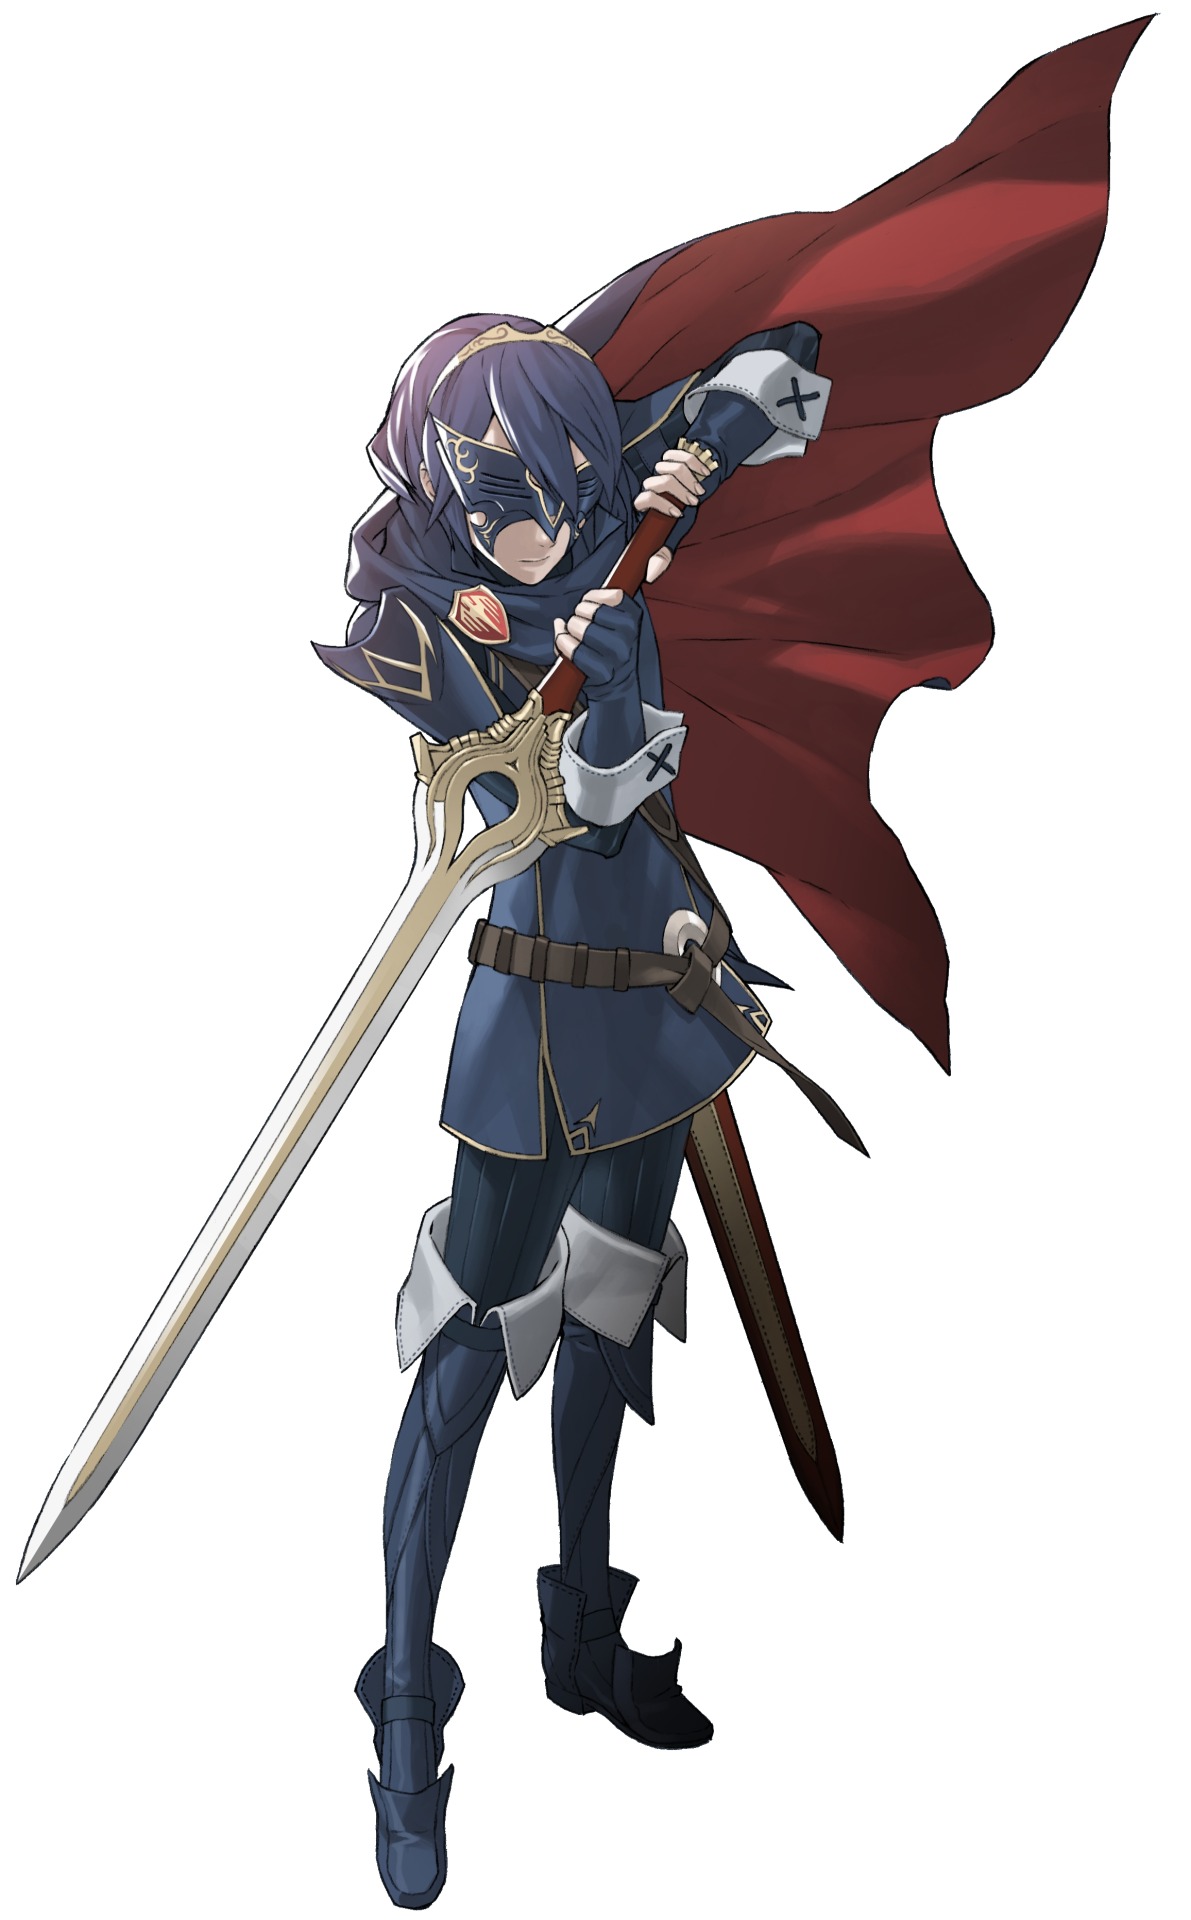 fire emblem awakening is game of the year because of basilio. the fact that Owain,